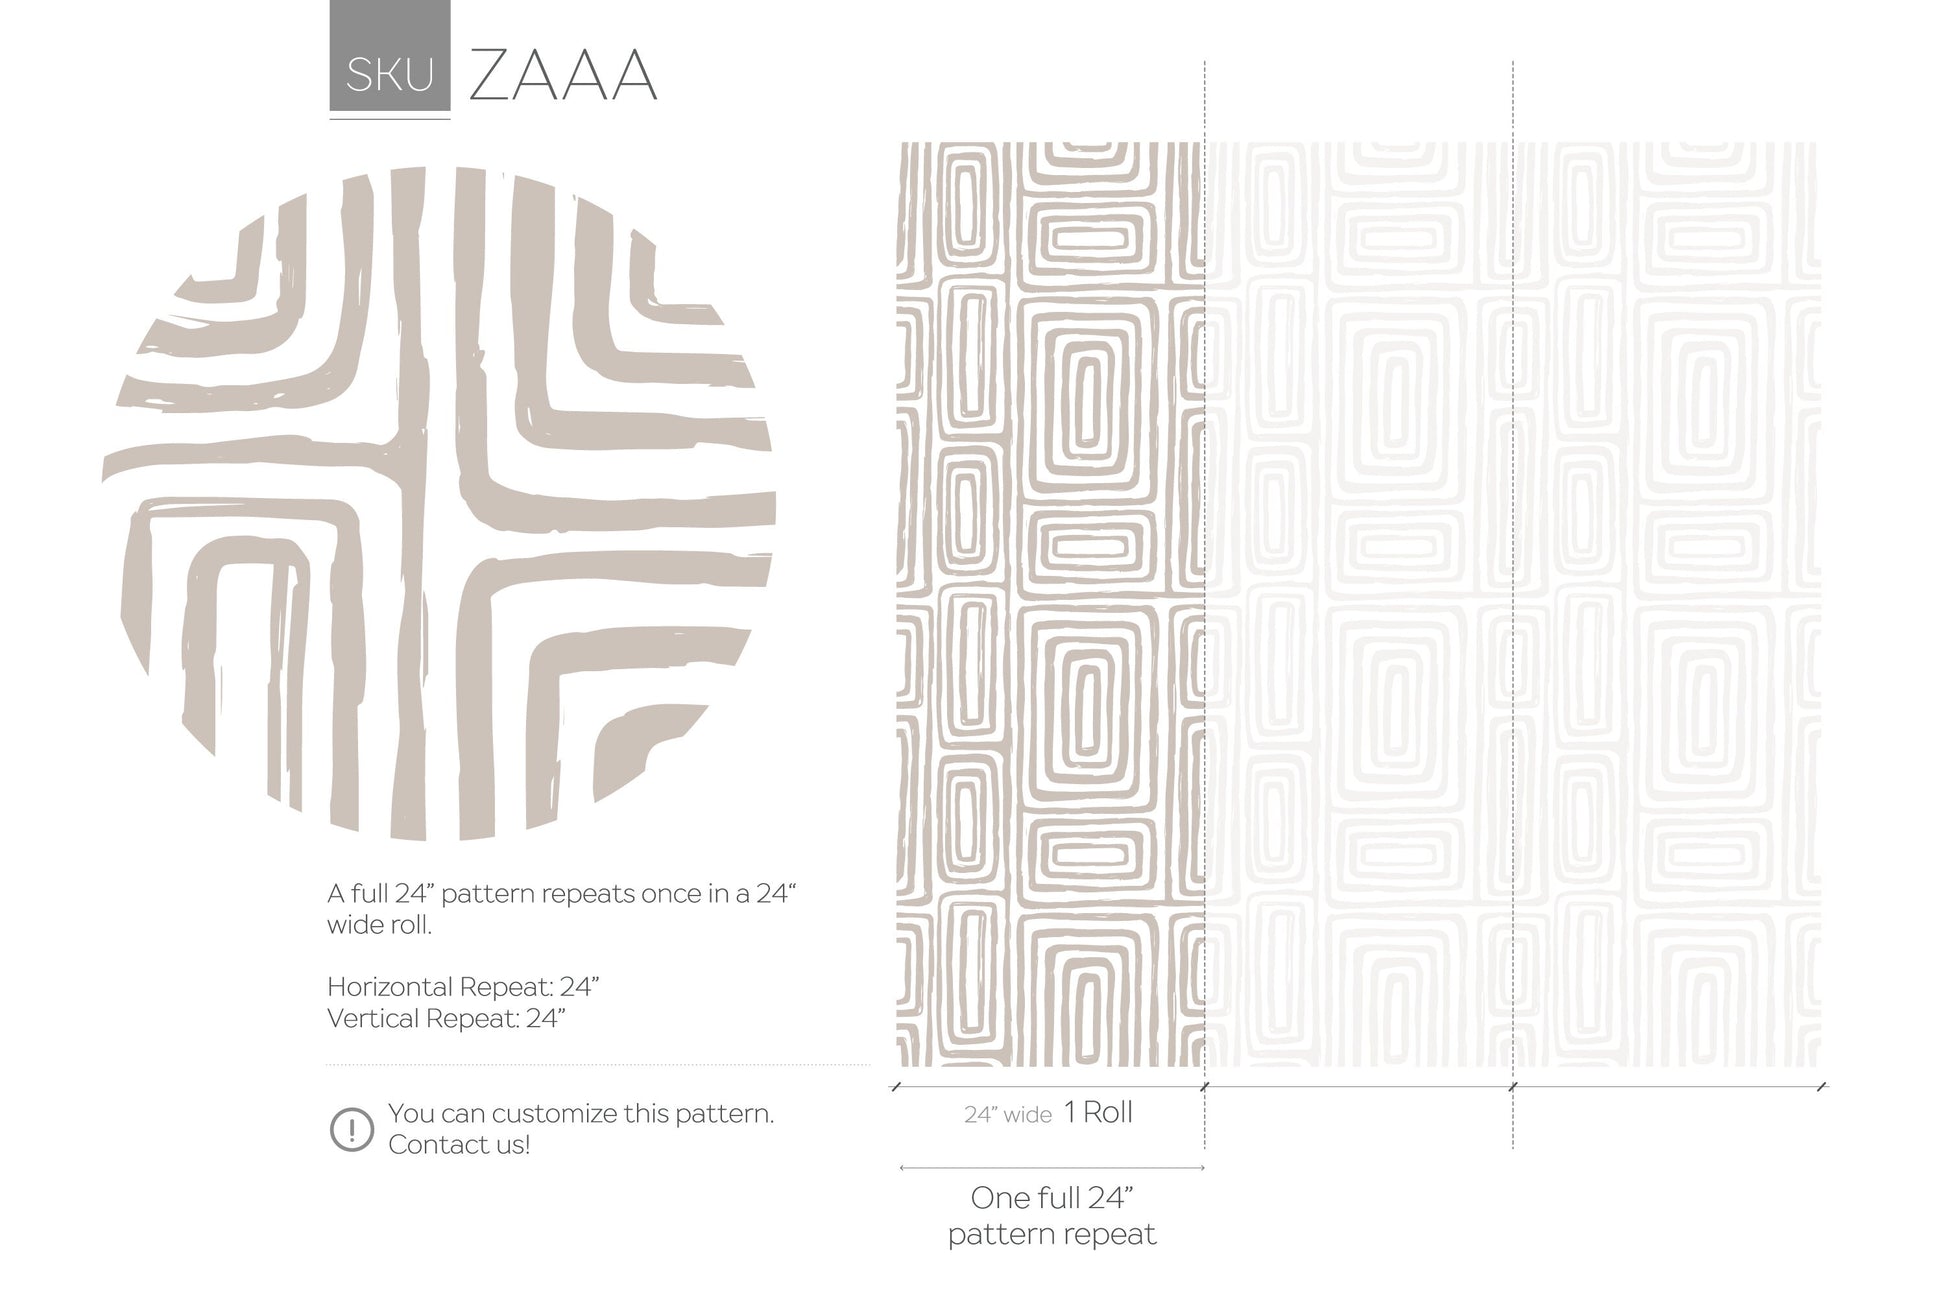 Warm Neutral Paint Brushed Labyrinth Wallpaper Peel and Stick Removable Repositionable Minimalistic Abstract Boho Beige & White - ZAAA